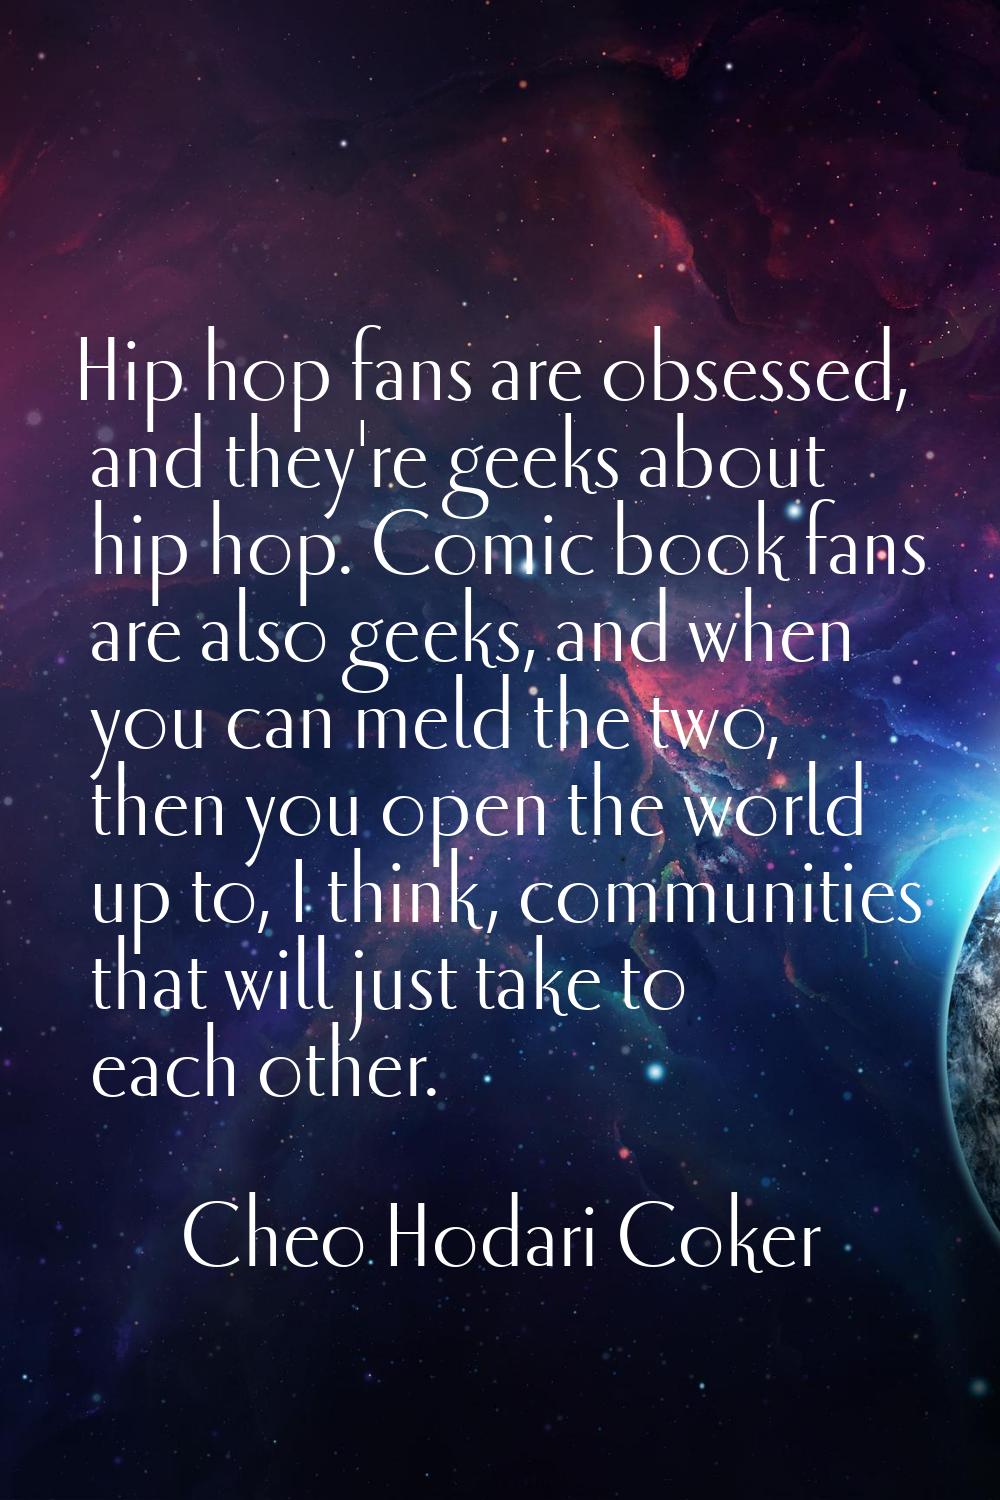 Hip hop fans are obsessed, and they're geeks about hip hop. Comic book fans are also geeks, and whe